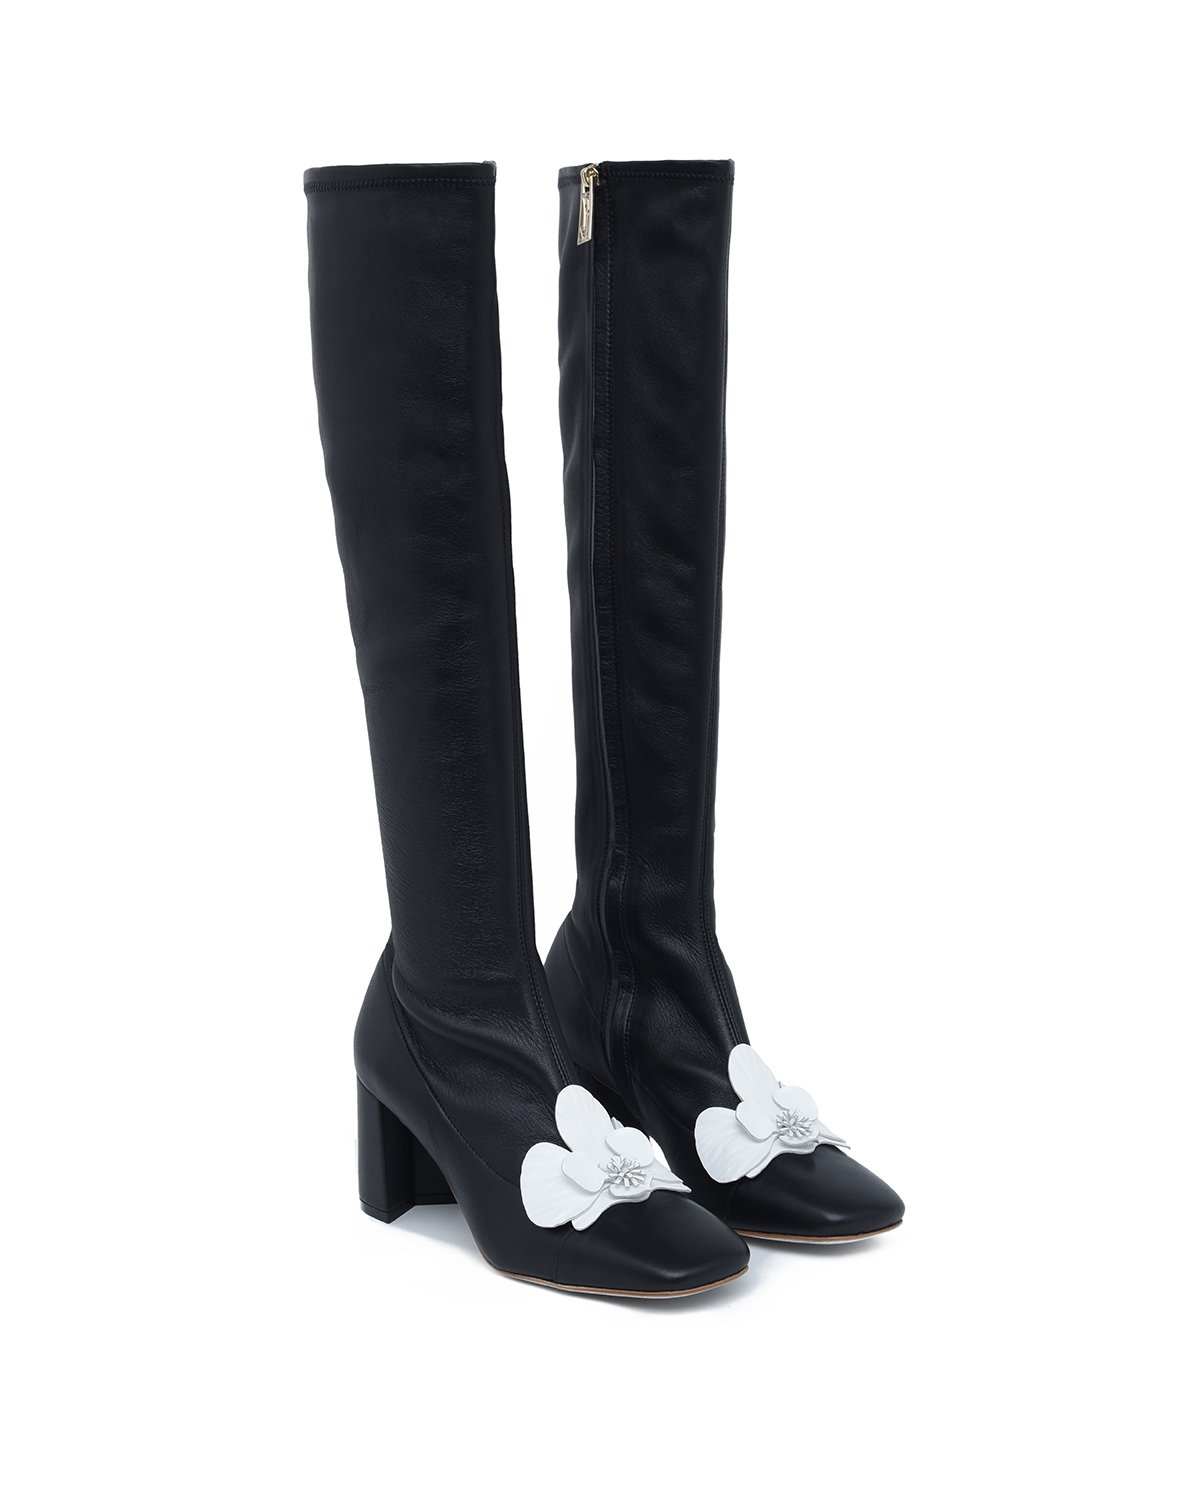 Black leather knee boots | Accessories | Genny